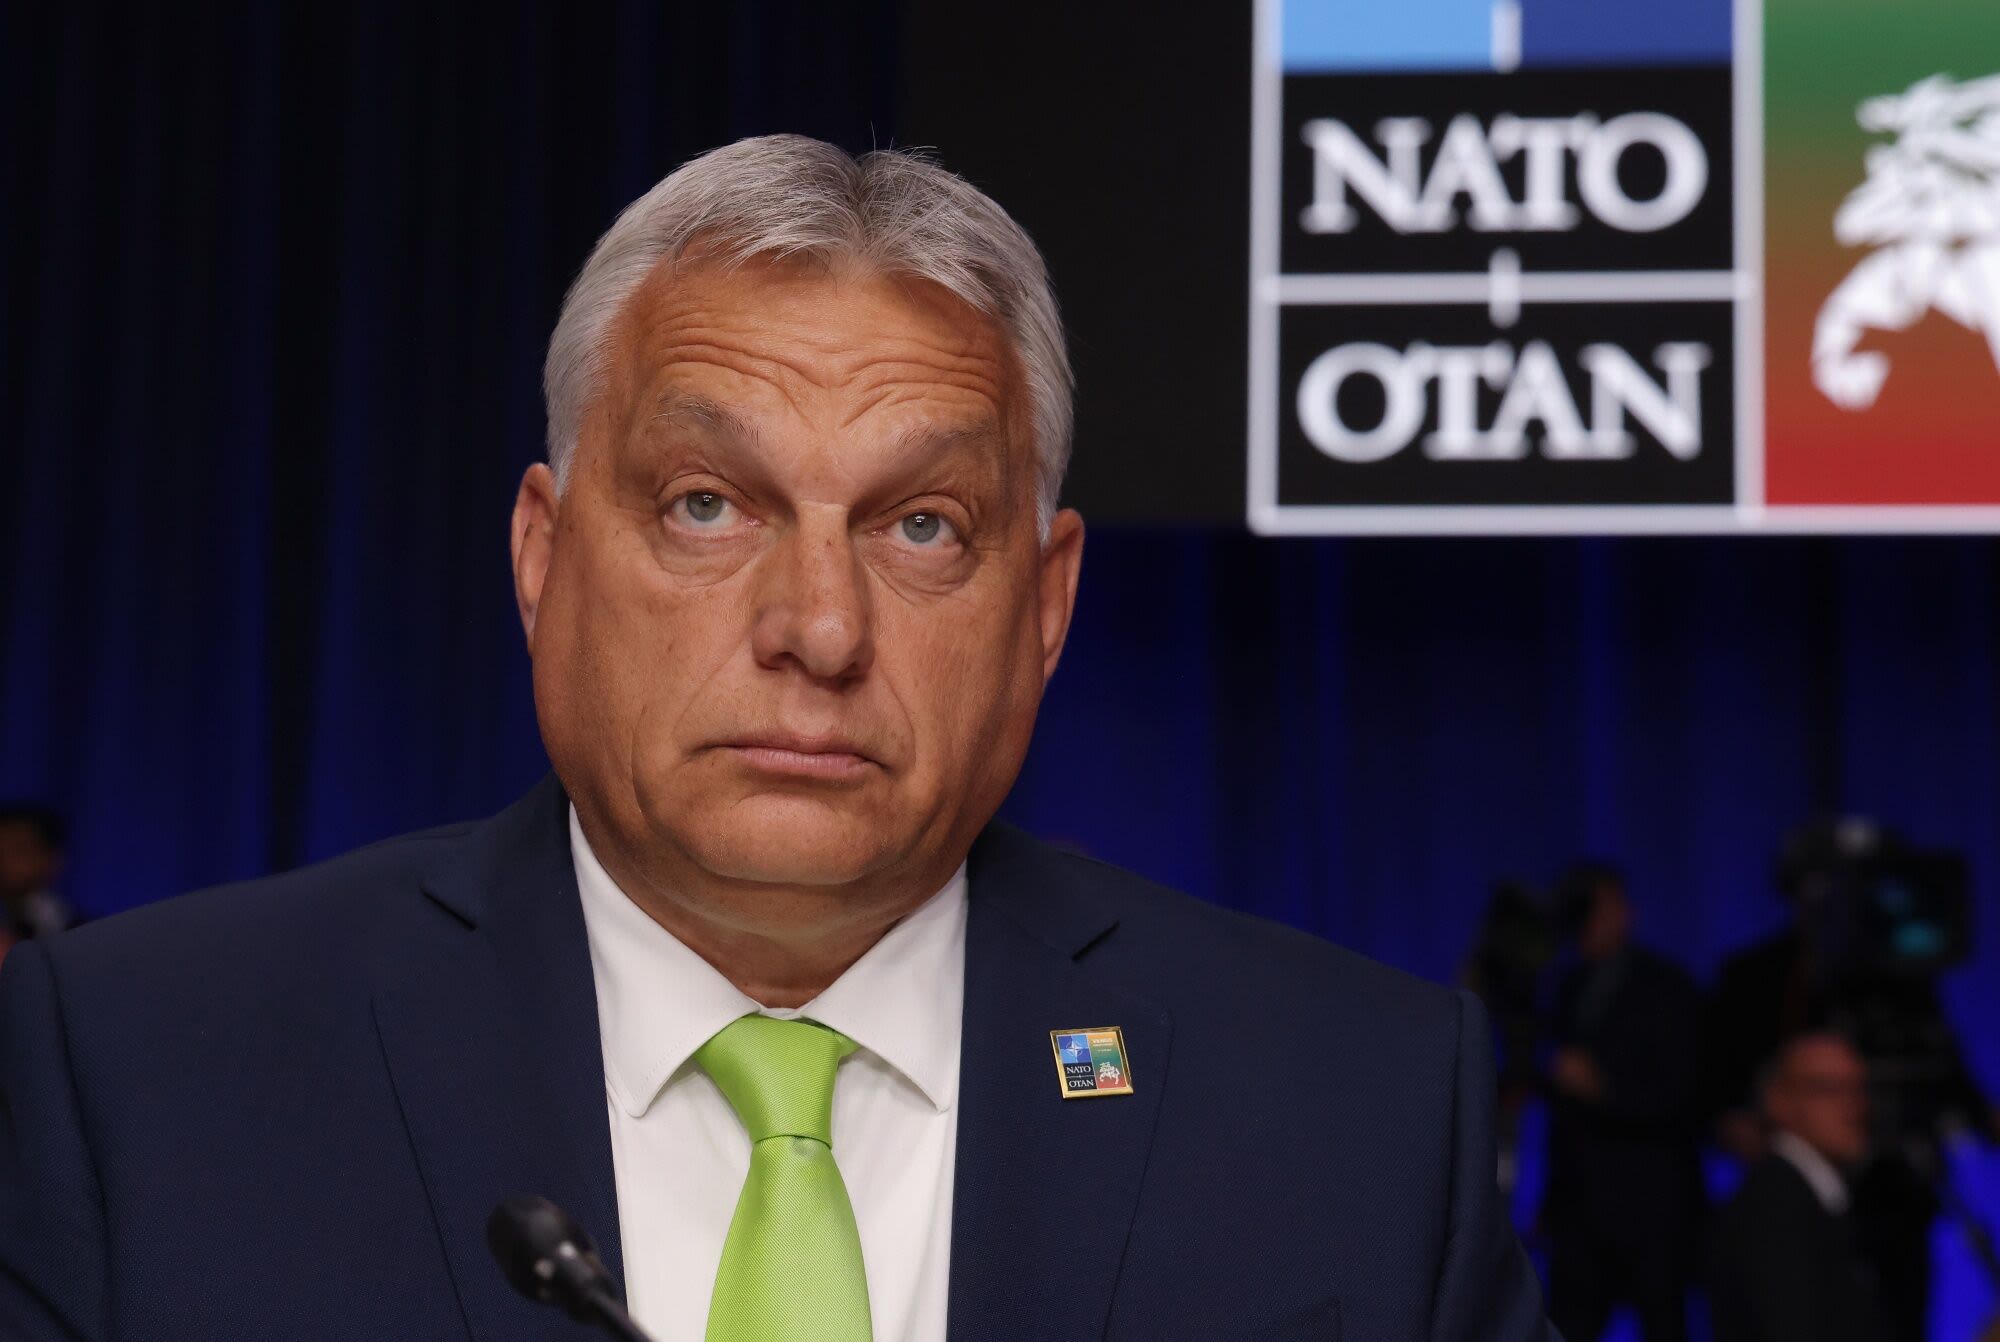 Hungary Wants to ‘Redefine’ Its NATO Membership, Orban Says